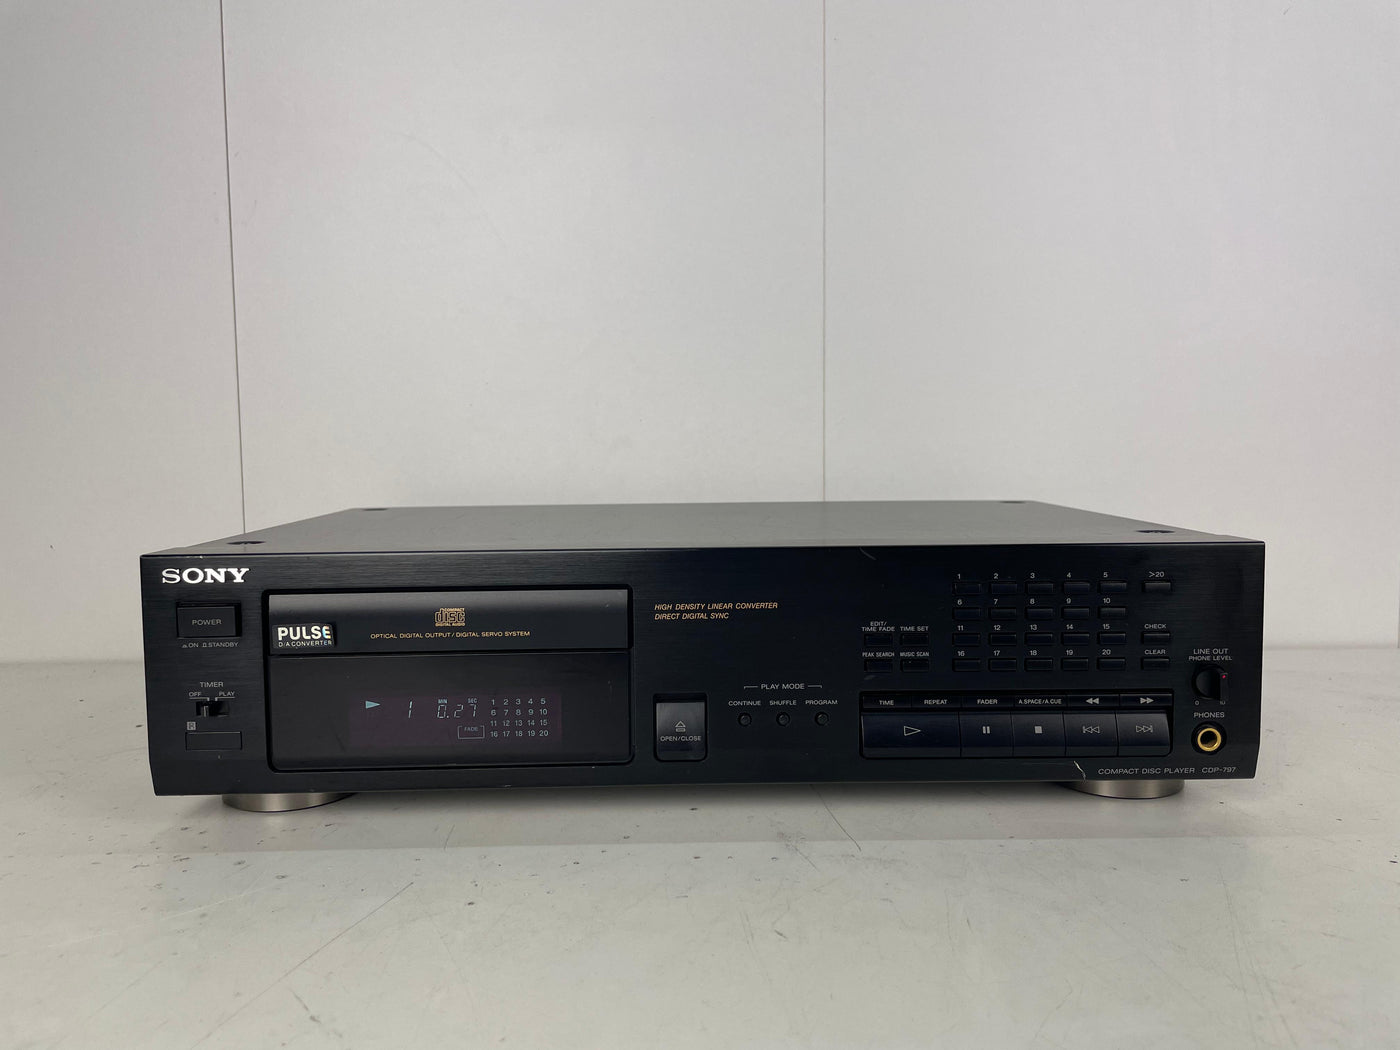 Sony CDP-797 Stereo Compact Disc-speler